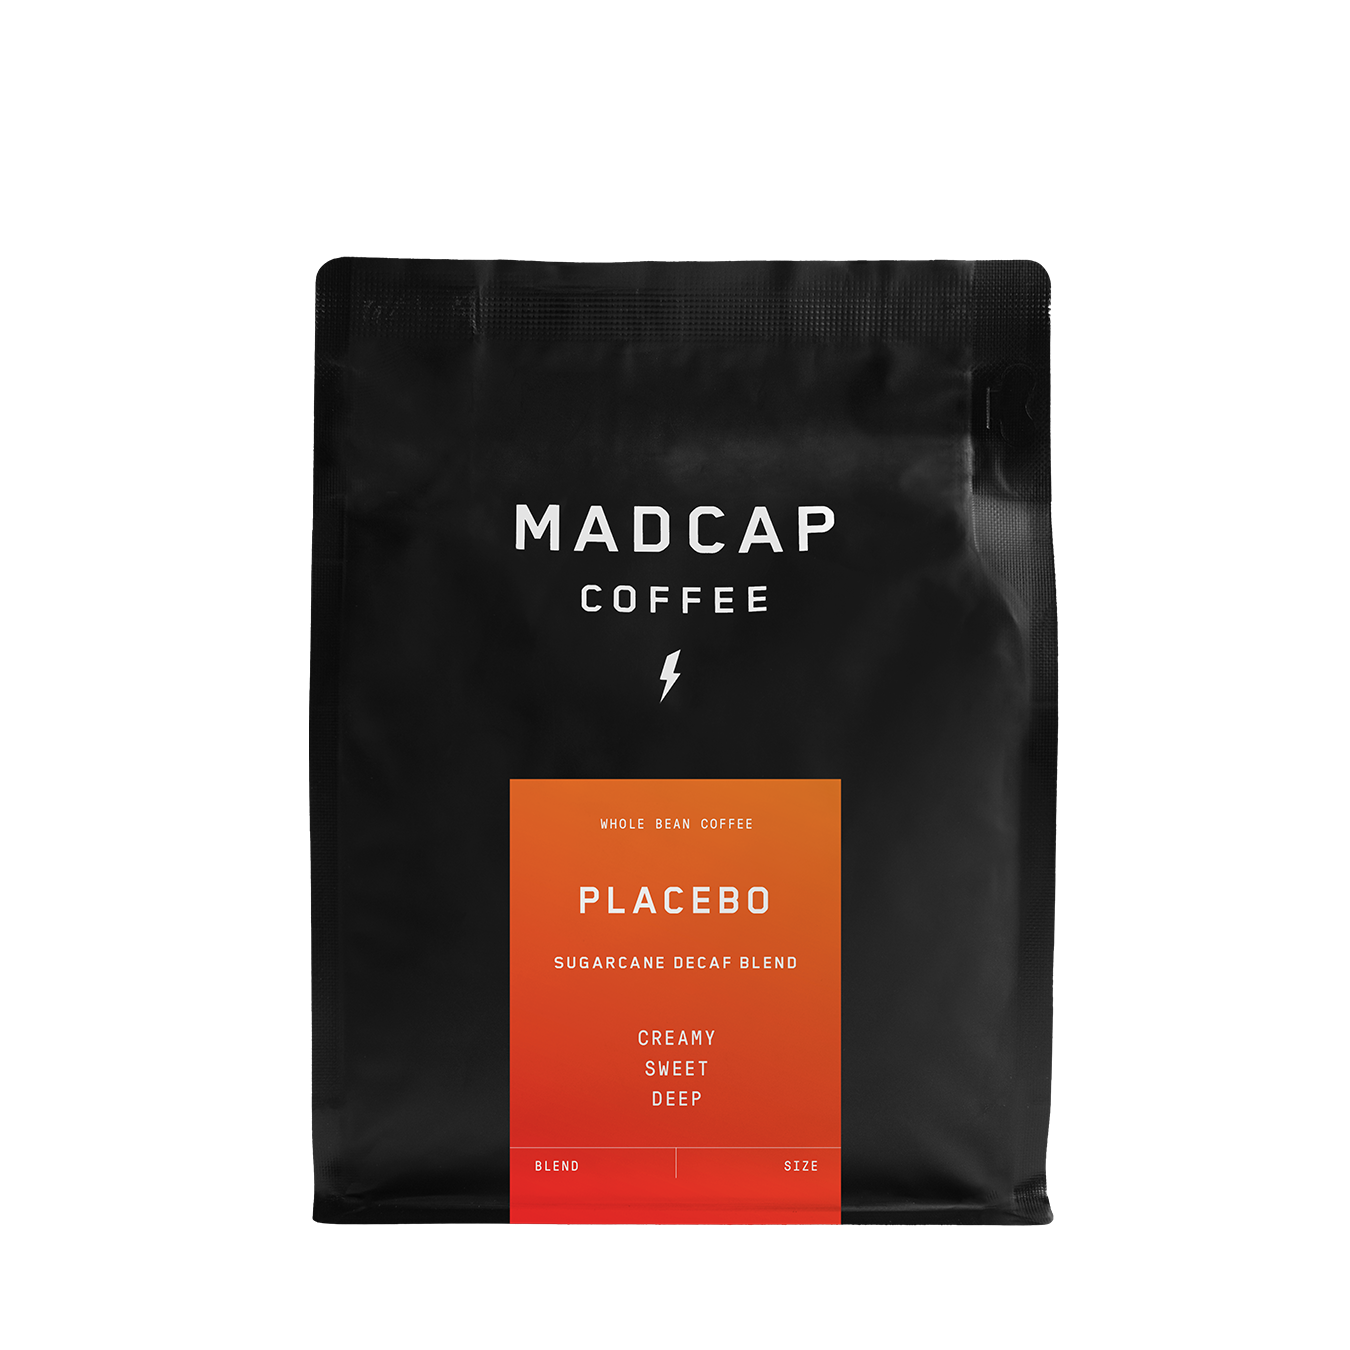 Placebo decaffeinated blend coffee